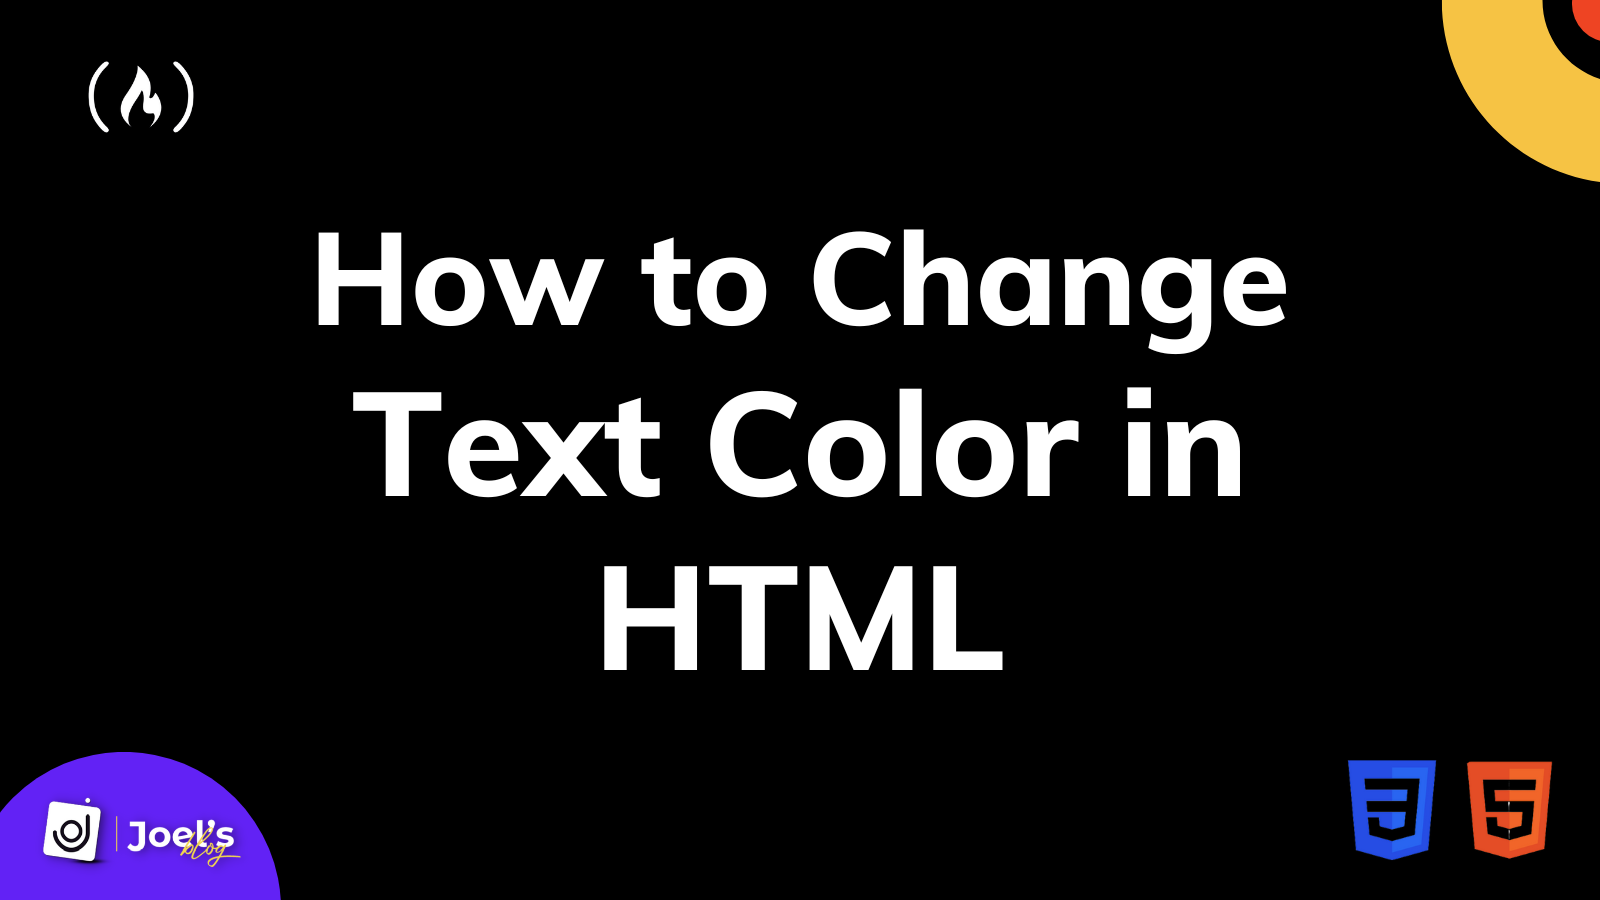 How to change text color in HTML?